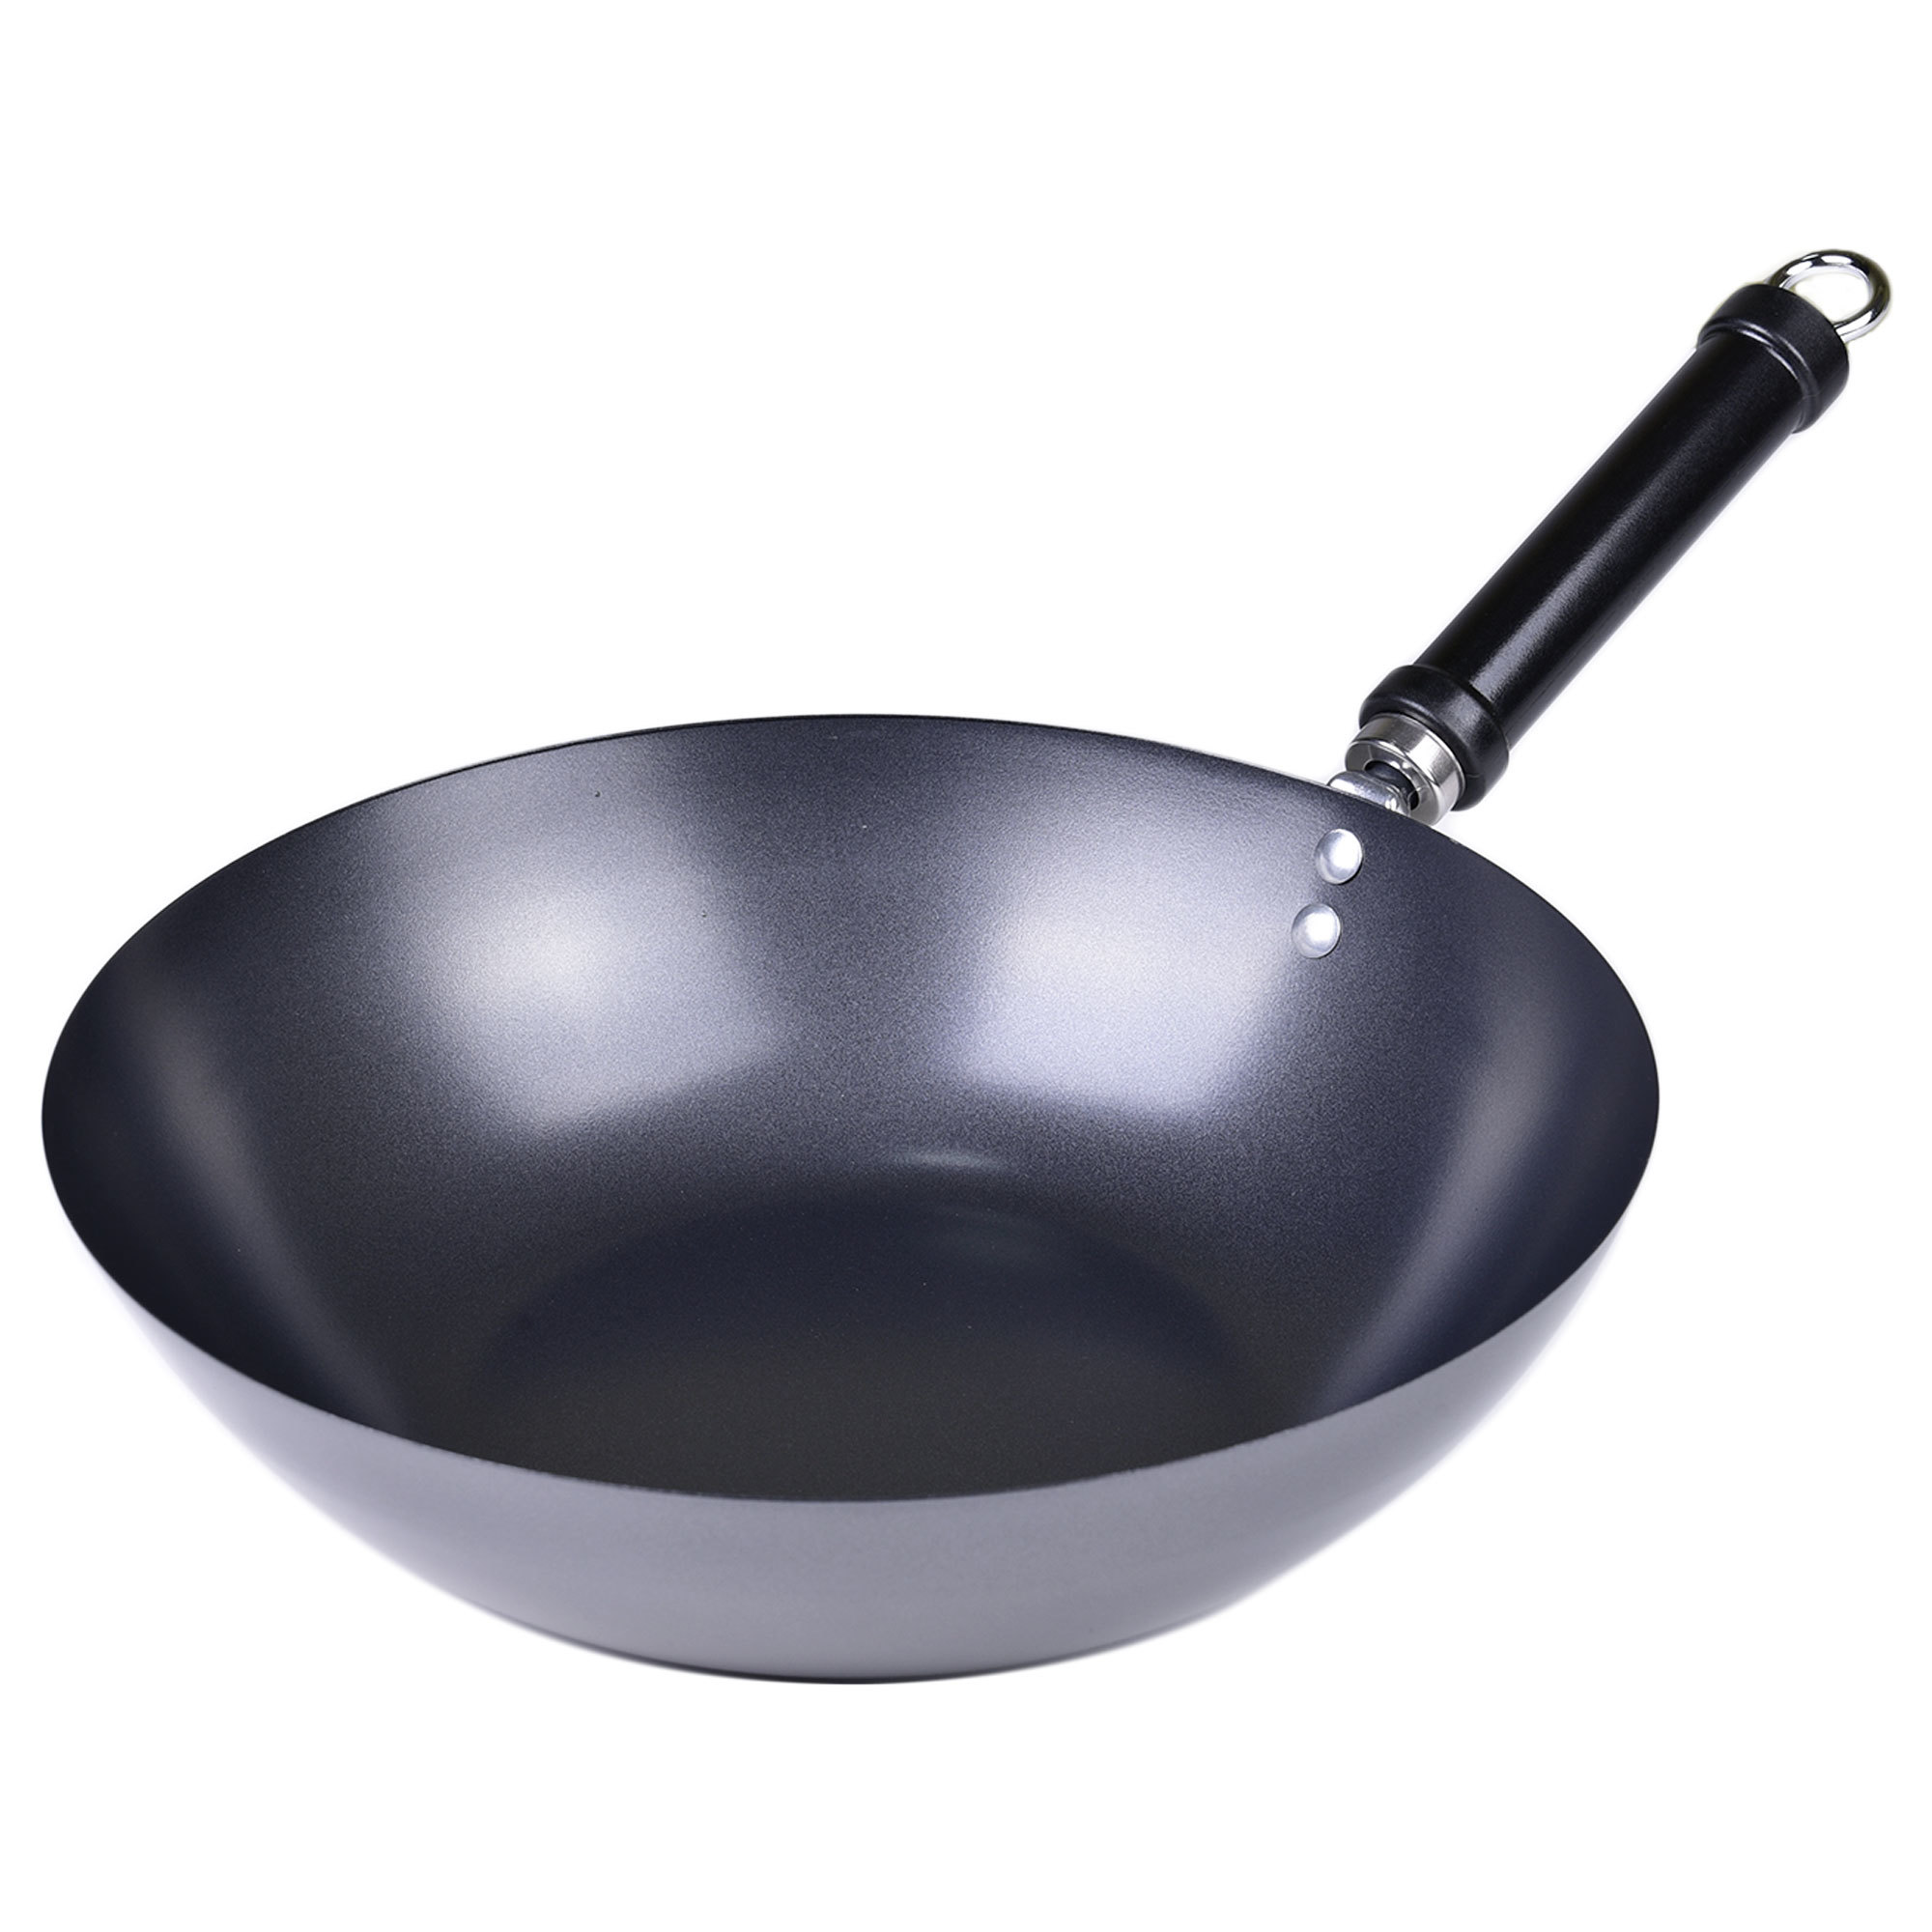 14 Inches Press Wok with Lid, Bakelite or Wooden Handle 3830